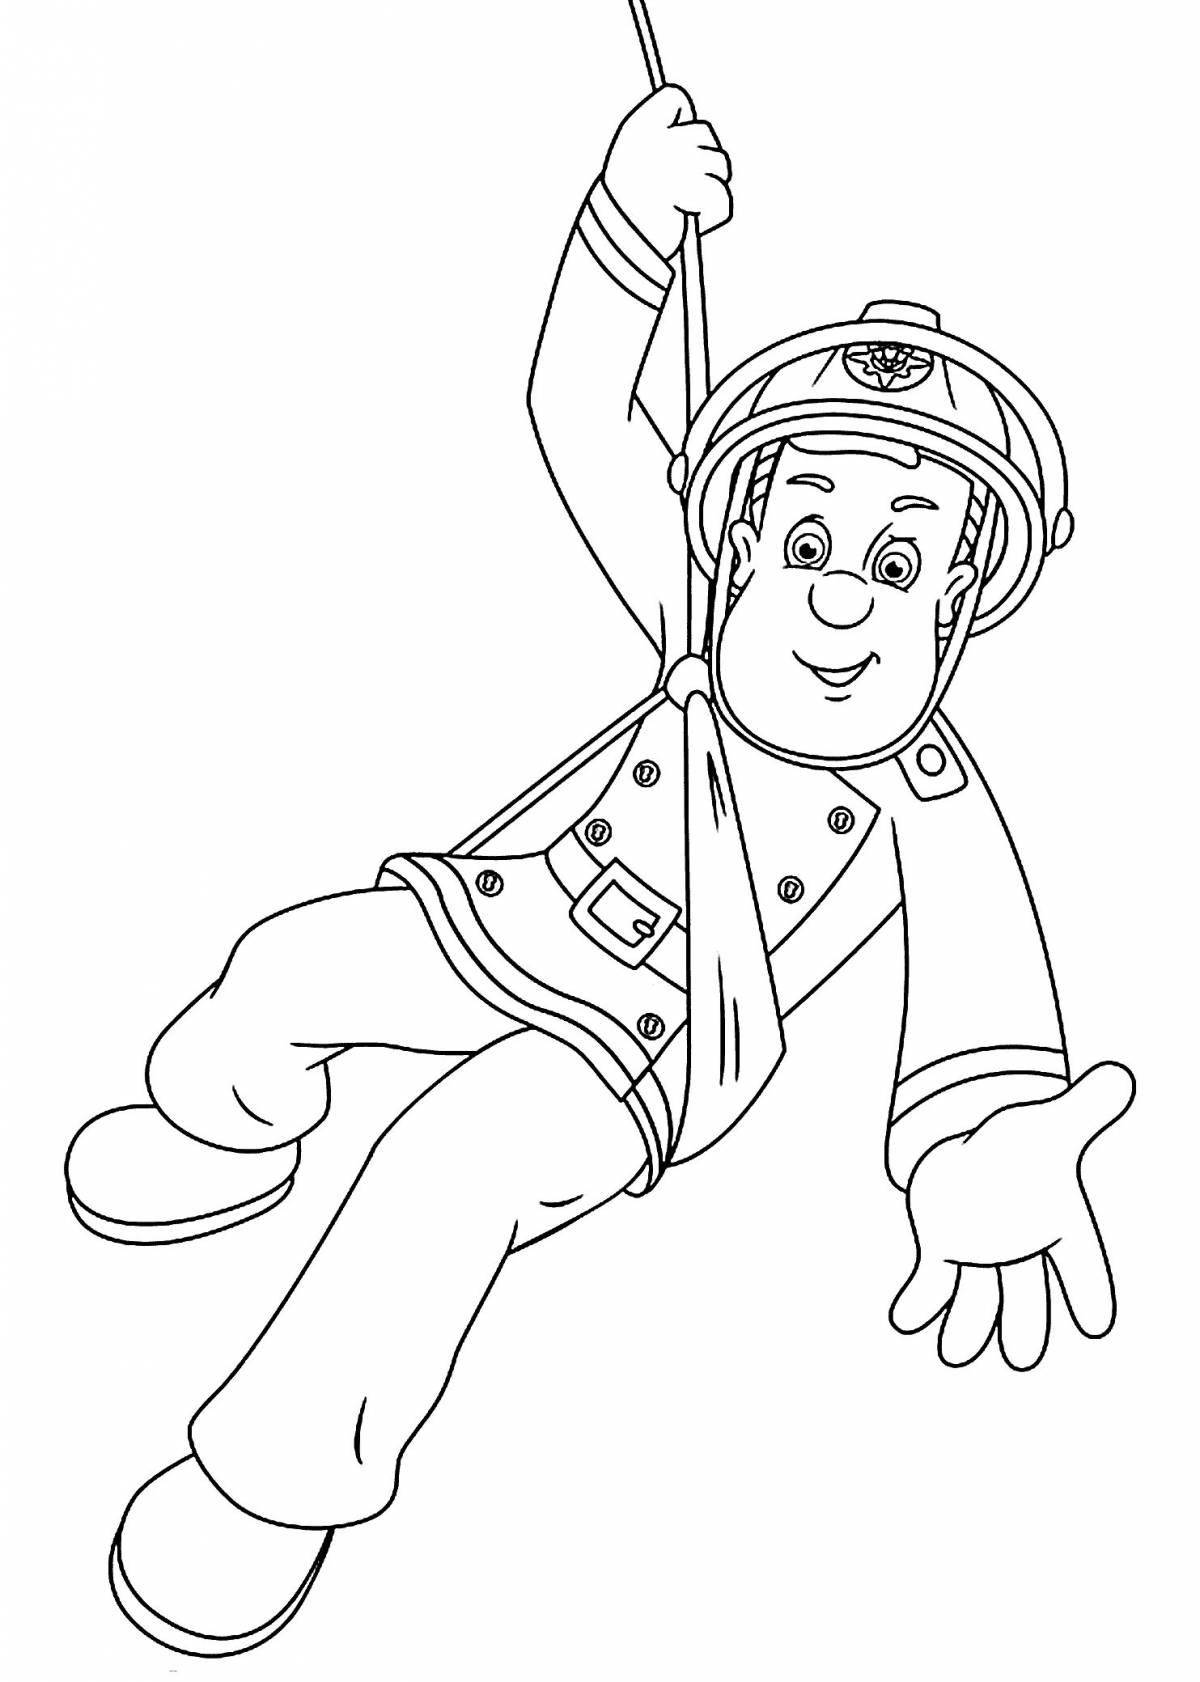 Coloring page glowing lifeguards